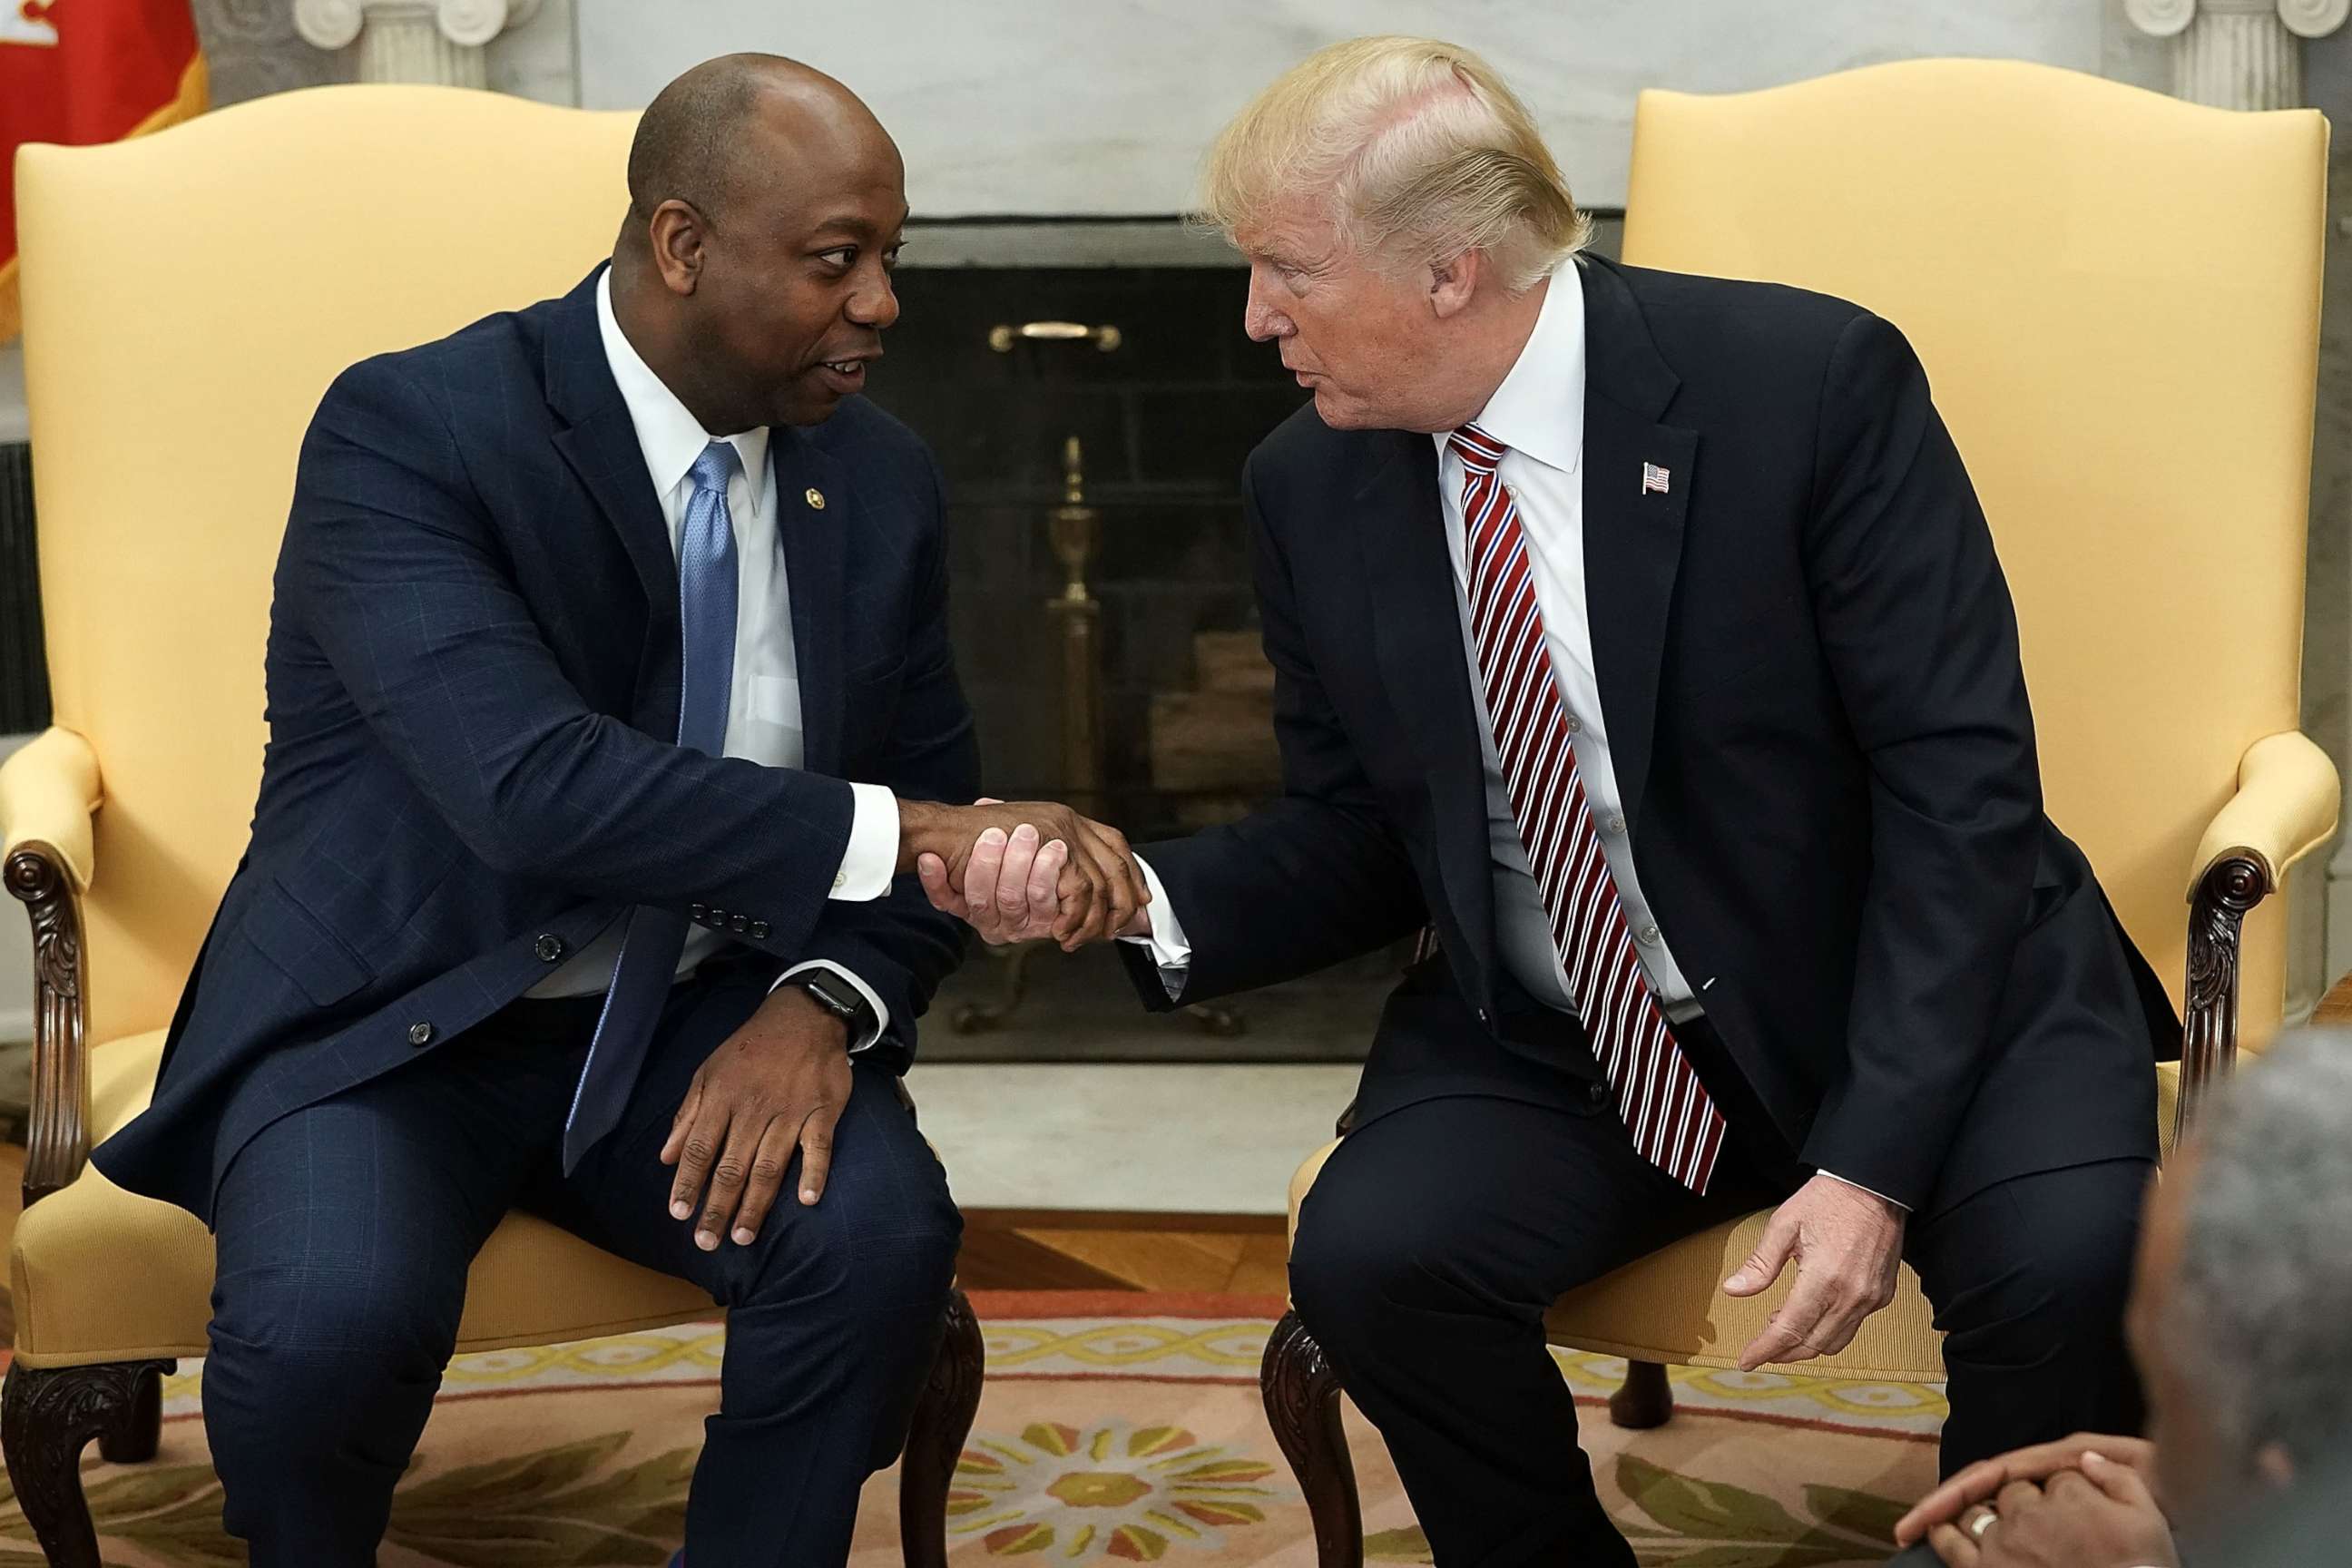 PHOTO: President Donald Trump shakes hands with Sen. Tim Scott (R-SC) during a working session regarding the Opportunity Zones provided by tax reform in the Oval Office of the White House, Feb.  14, 2018.